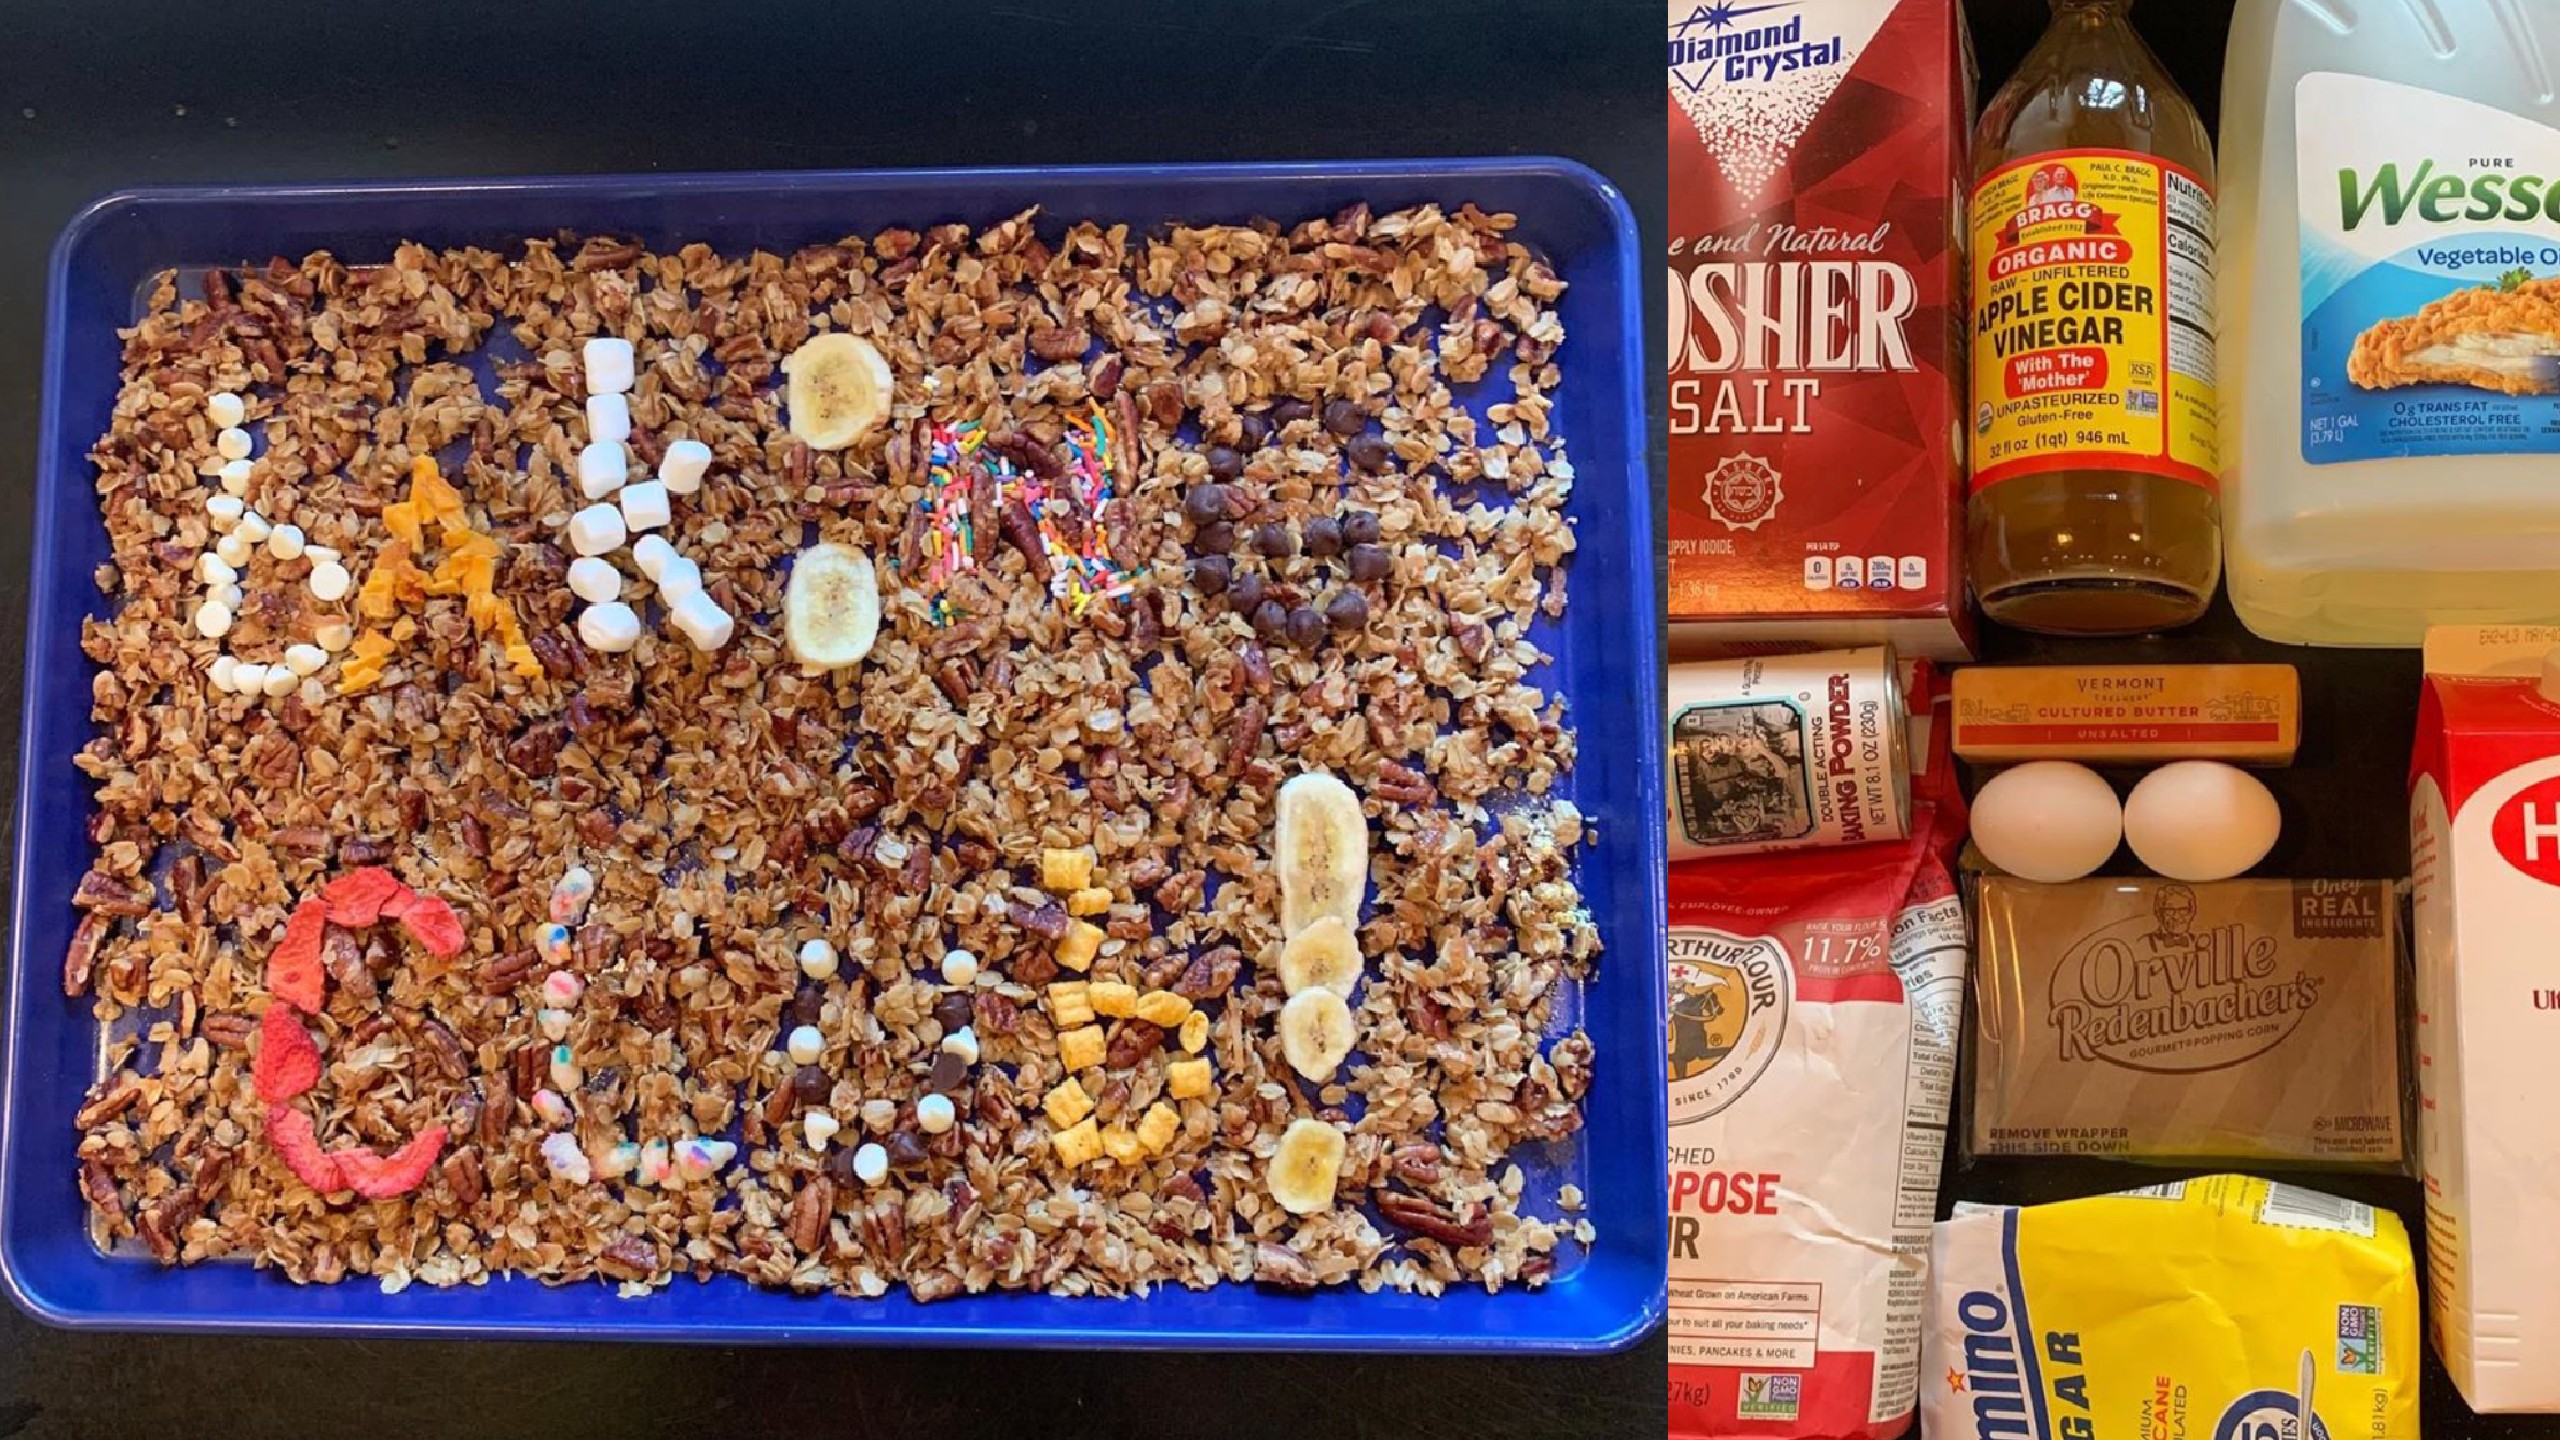 On the left, “baking club” spelled out with granola ingredients on a blue enamel tray. On the right, baking ingredients like sugar, flour, and eggs, shot from above.